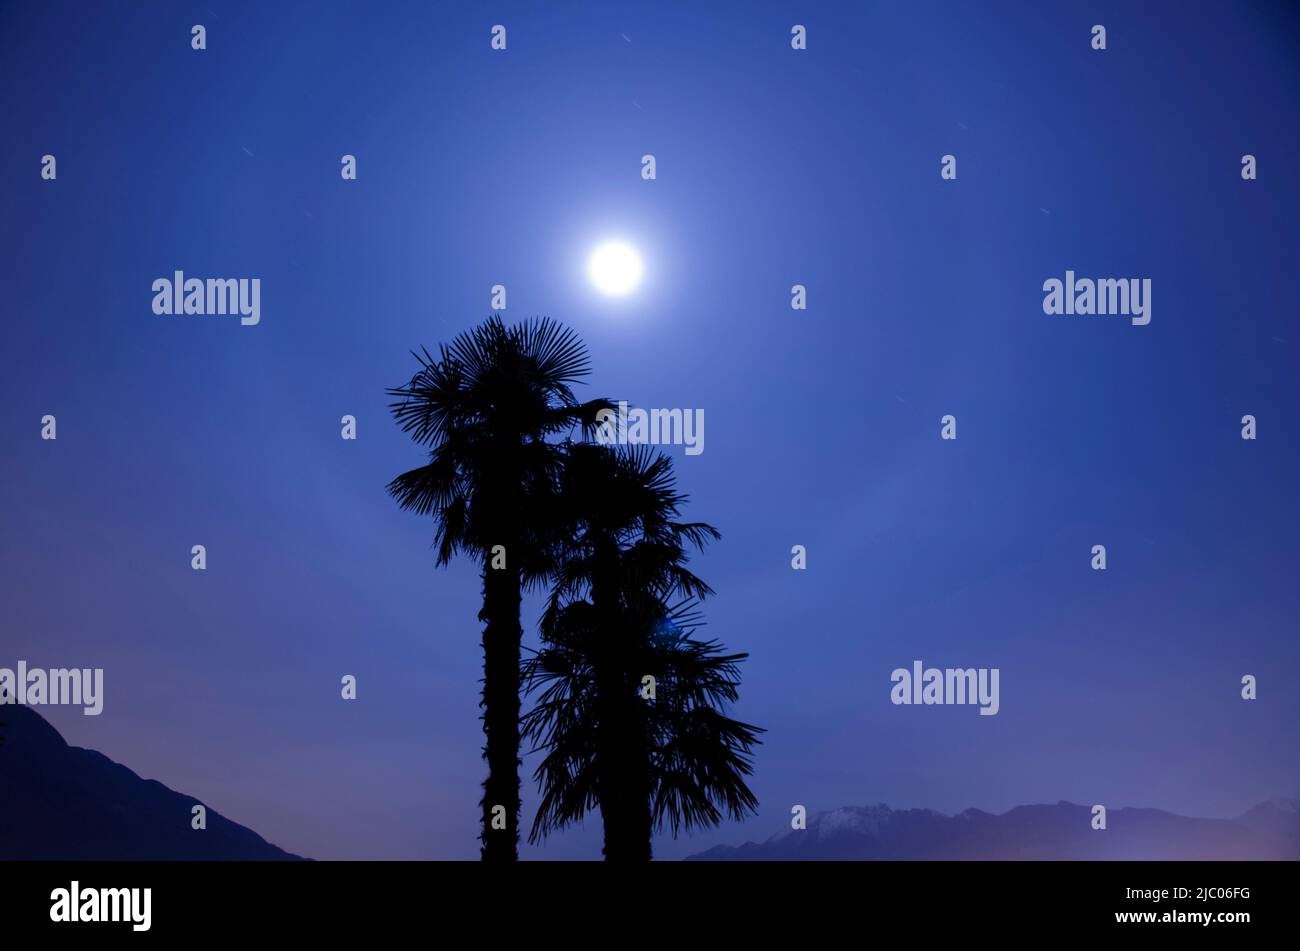 Palm Trees and Full Moon with Halo in Ticino, Switzerland. Stock Photo